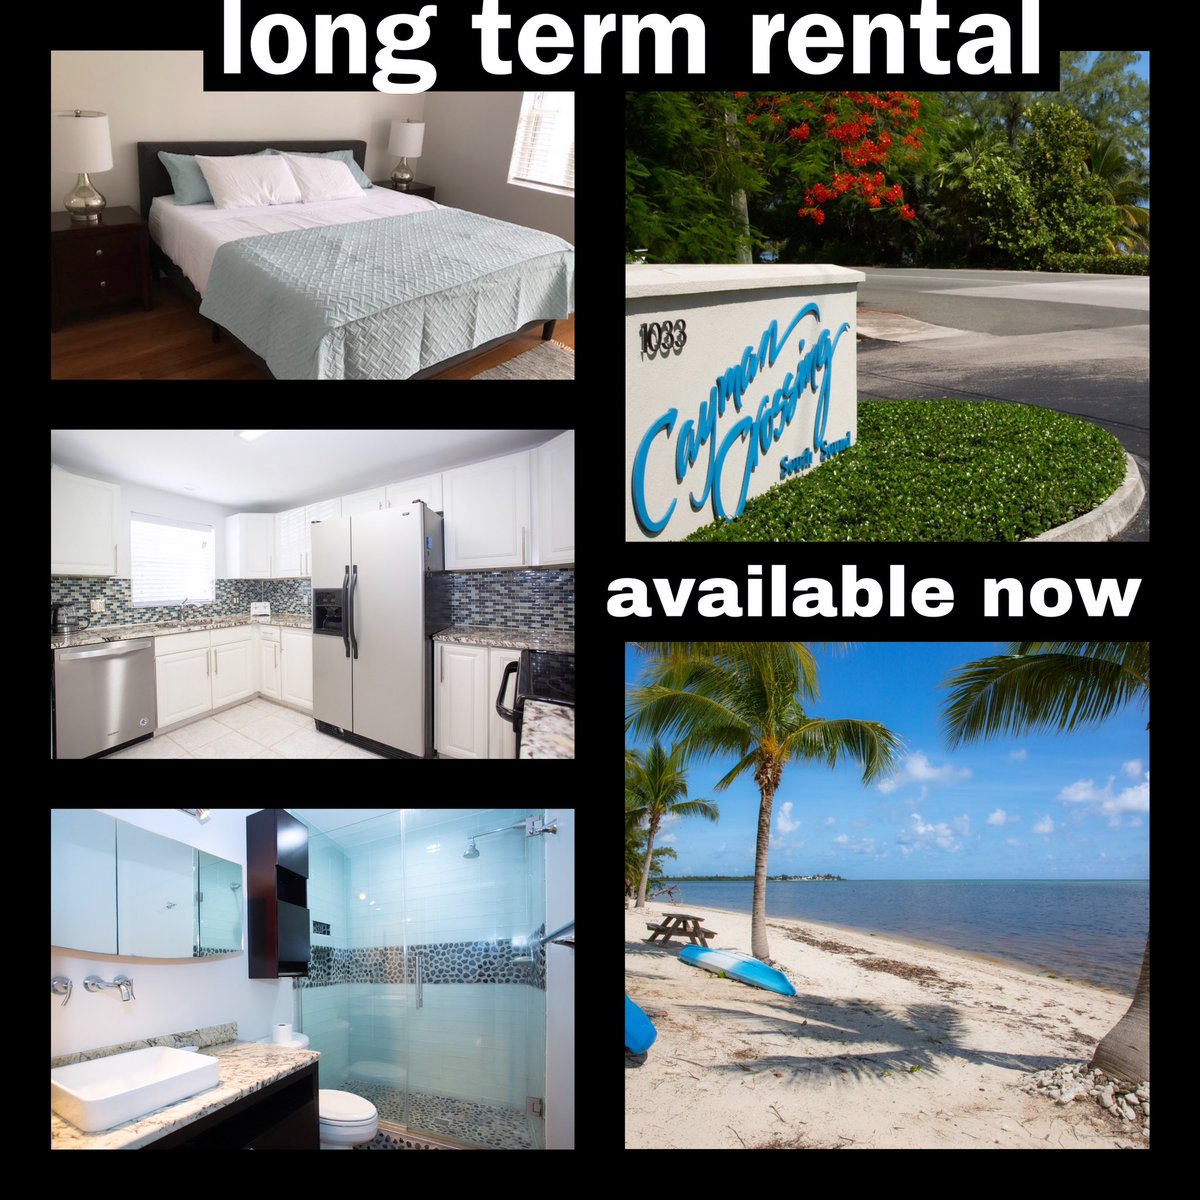 Long term rental

2 bed; 2.5th bath available now!

Open floor plan; spacious living area; opens to a lovely covered patio

2 pools; gym

$3200 CI per month, includes internet

WhatsApp or call Heather at 525-3600 to arrange a viewing

#CaymanRental #LongTermRental #PetFriendly